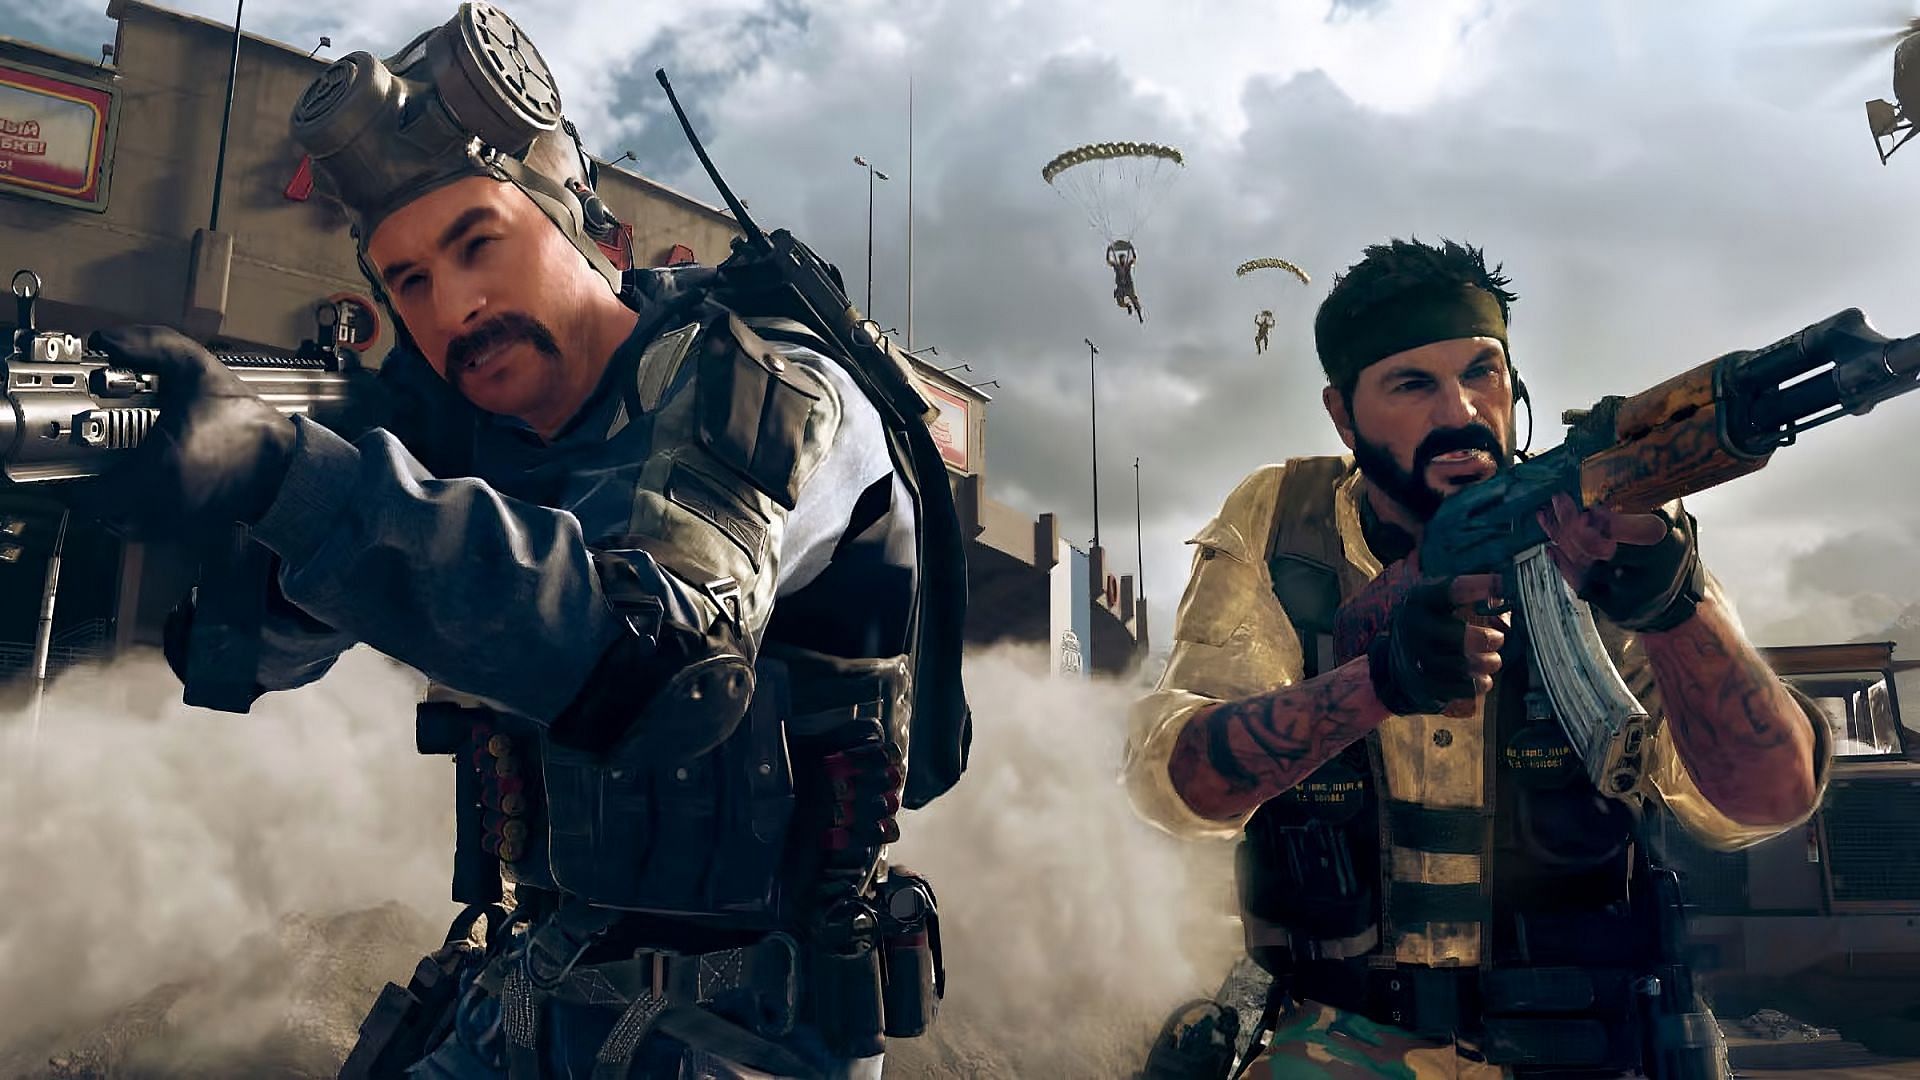 Leaked Call of Duty footage hints at the next Black Ops title (Image via Activision)